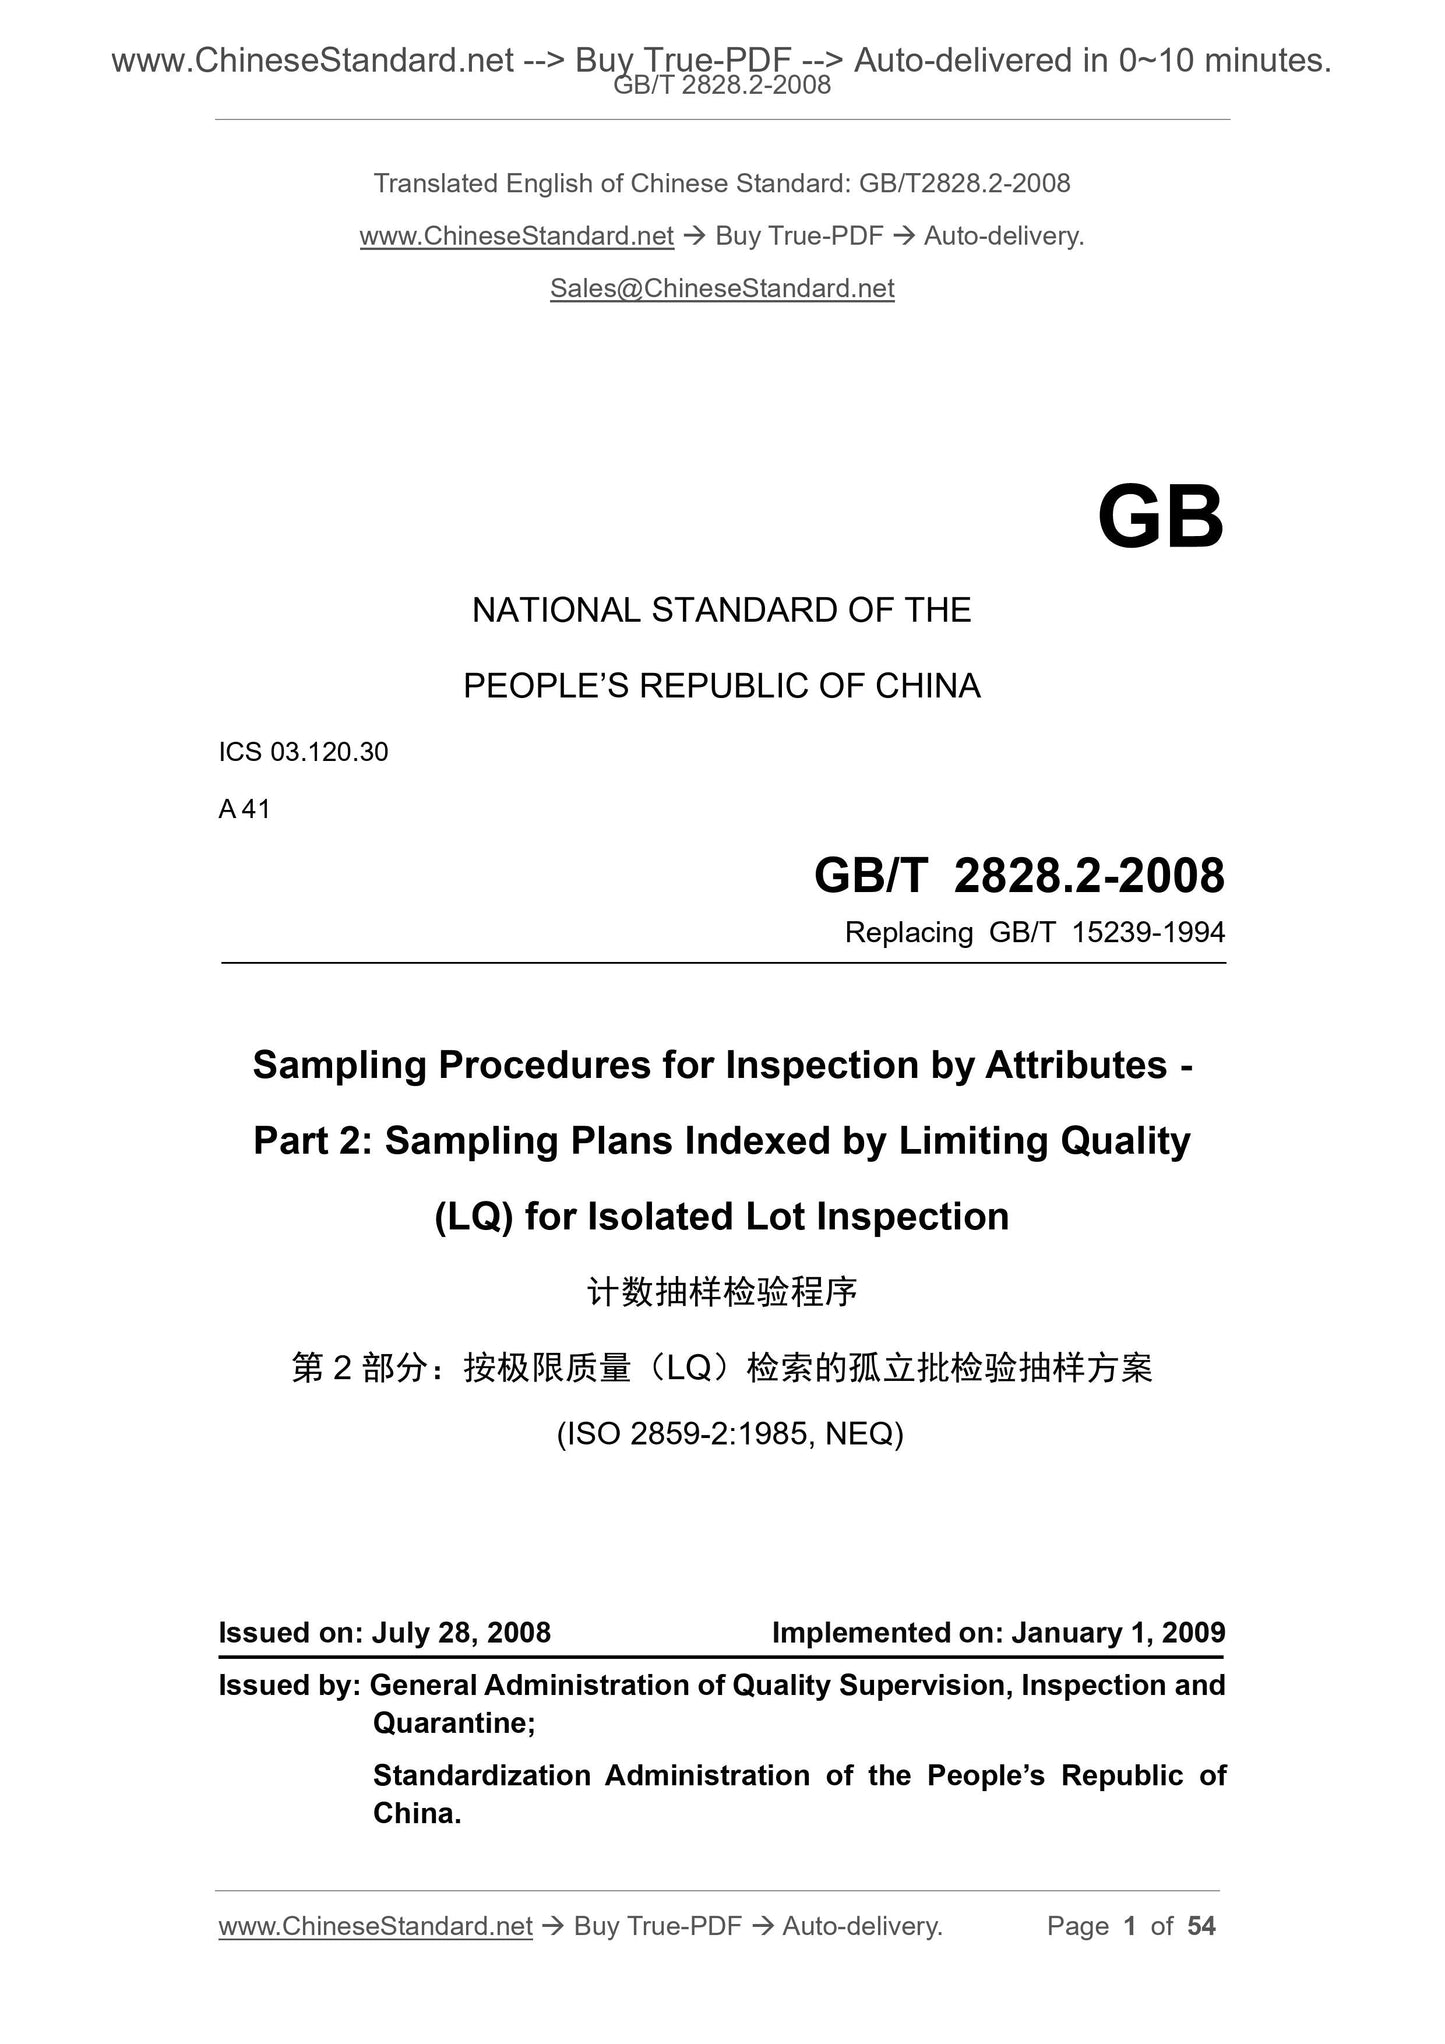 GB/T 2828.2-2008 Page 1